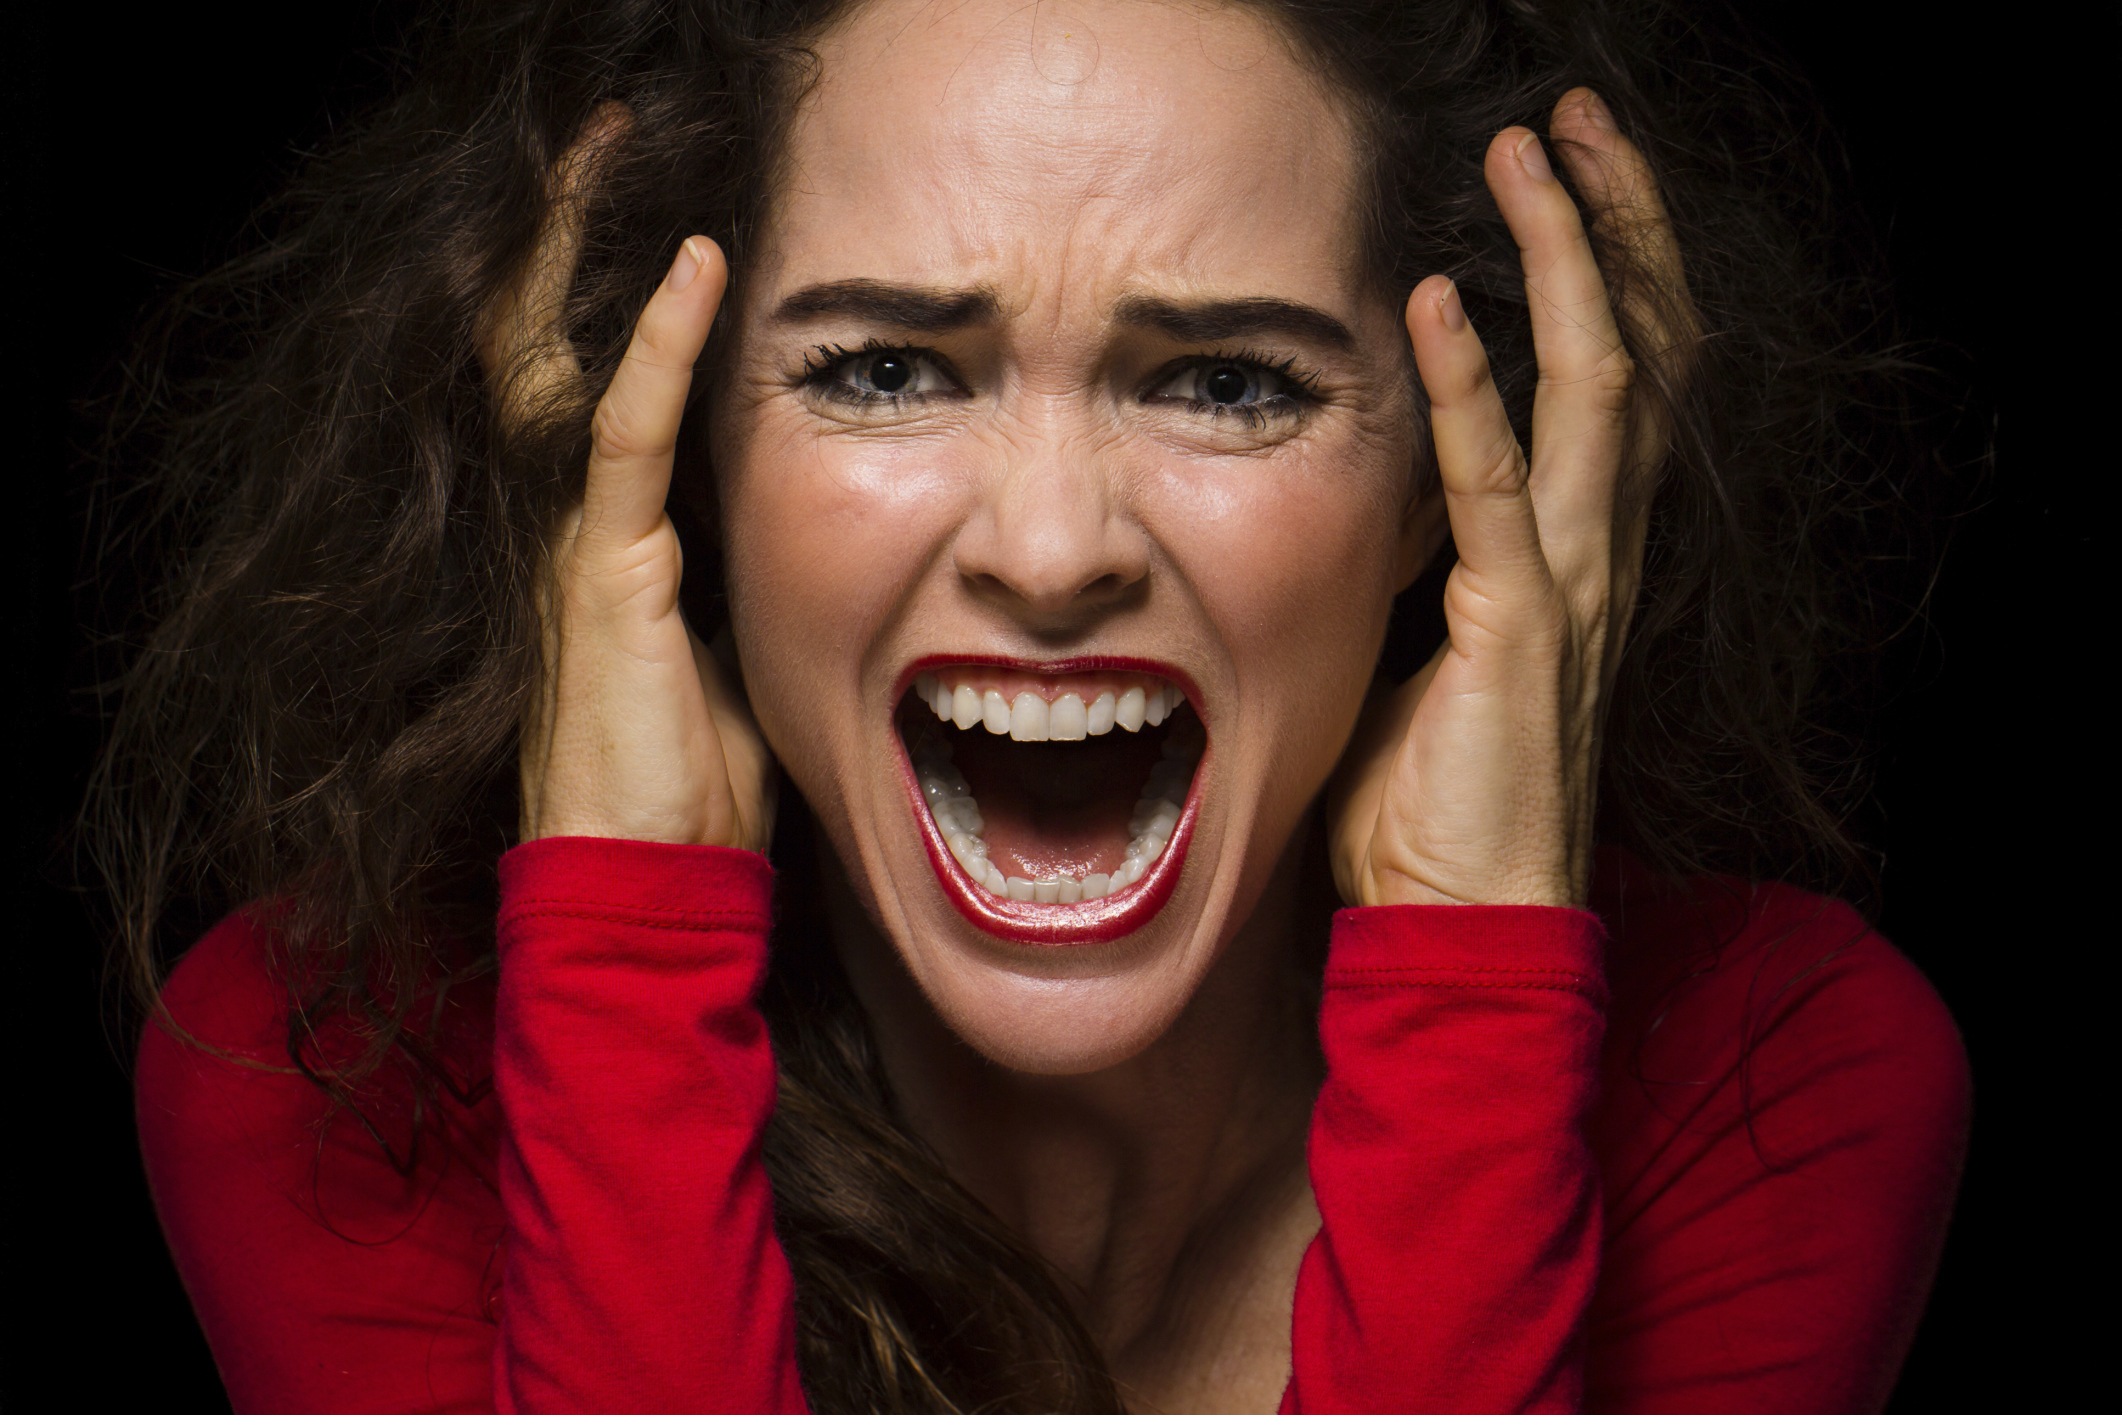 The 10 Second Rule to Stop Yelling – Advantage4Parents